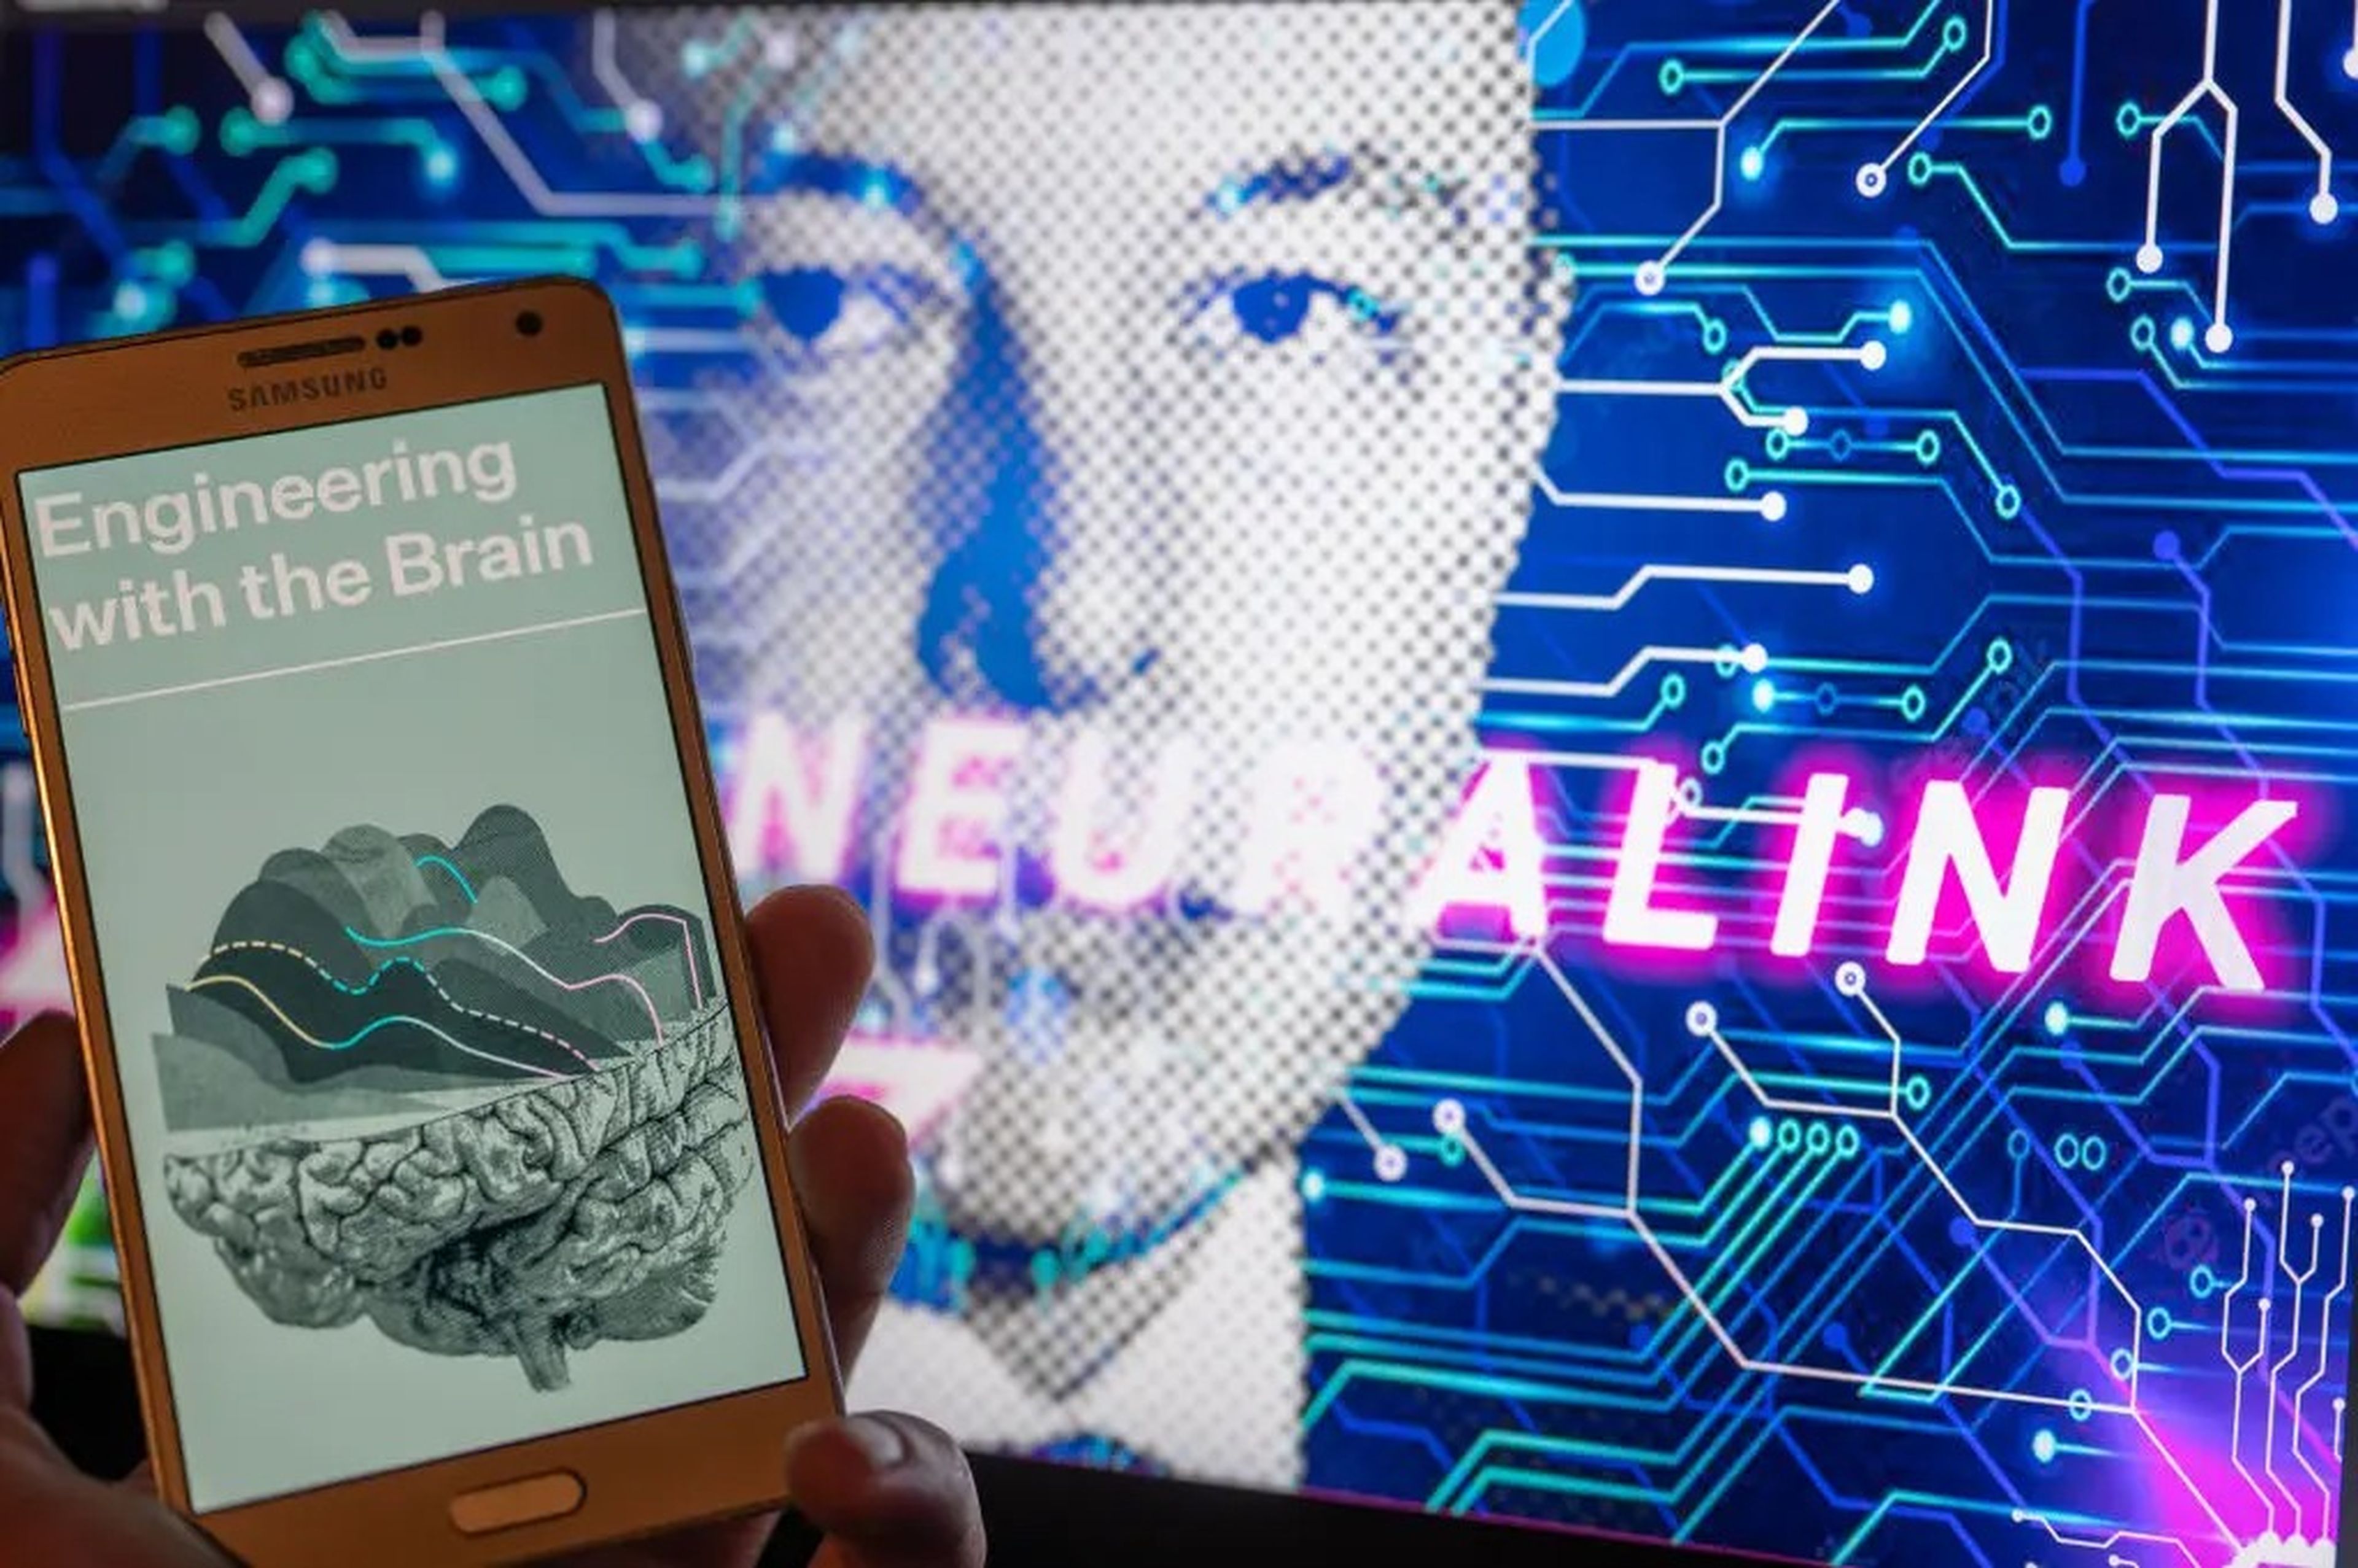 A hand holding a phone displaying a graphic that says, "Engineering with the Brain," in front of an image of Elon Musk with text saying, "Neuralink."